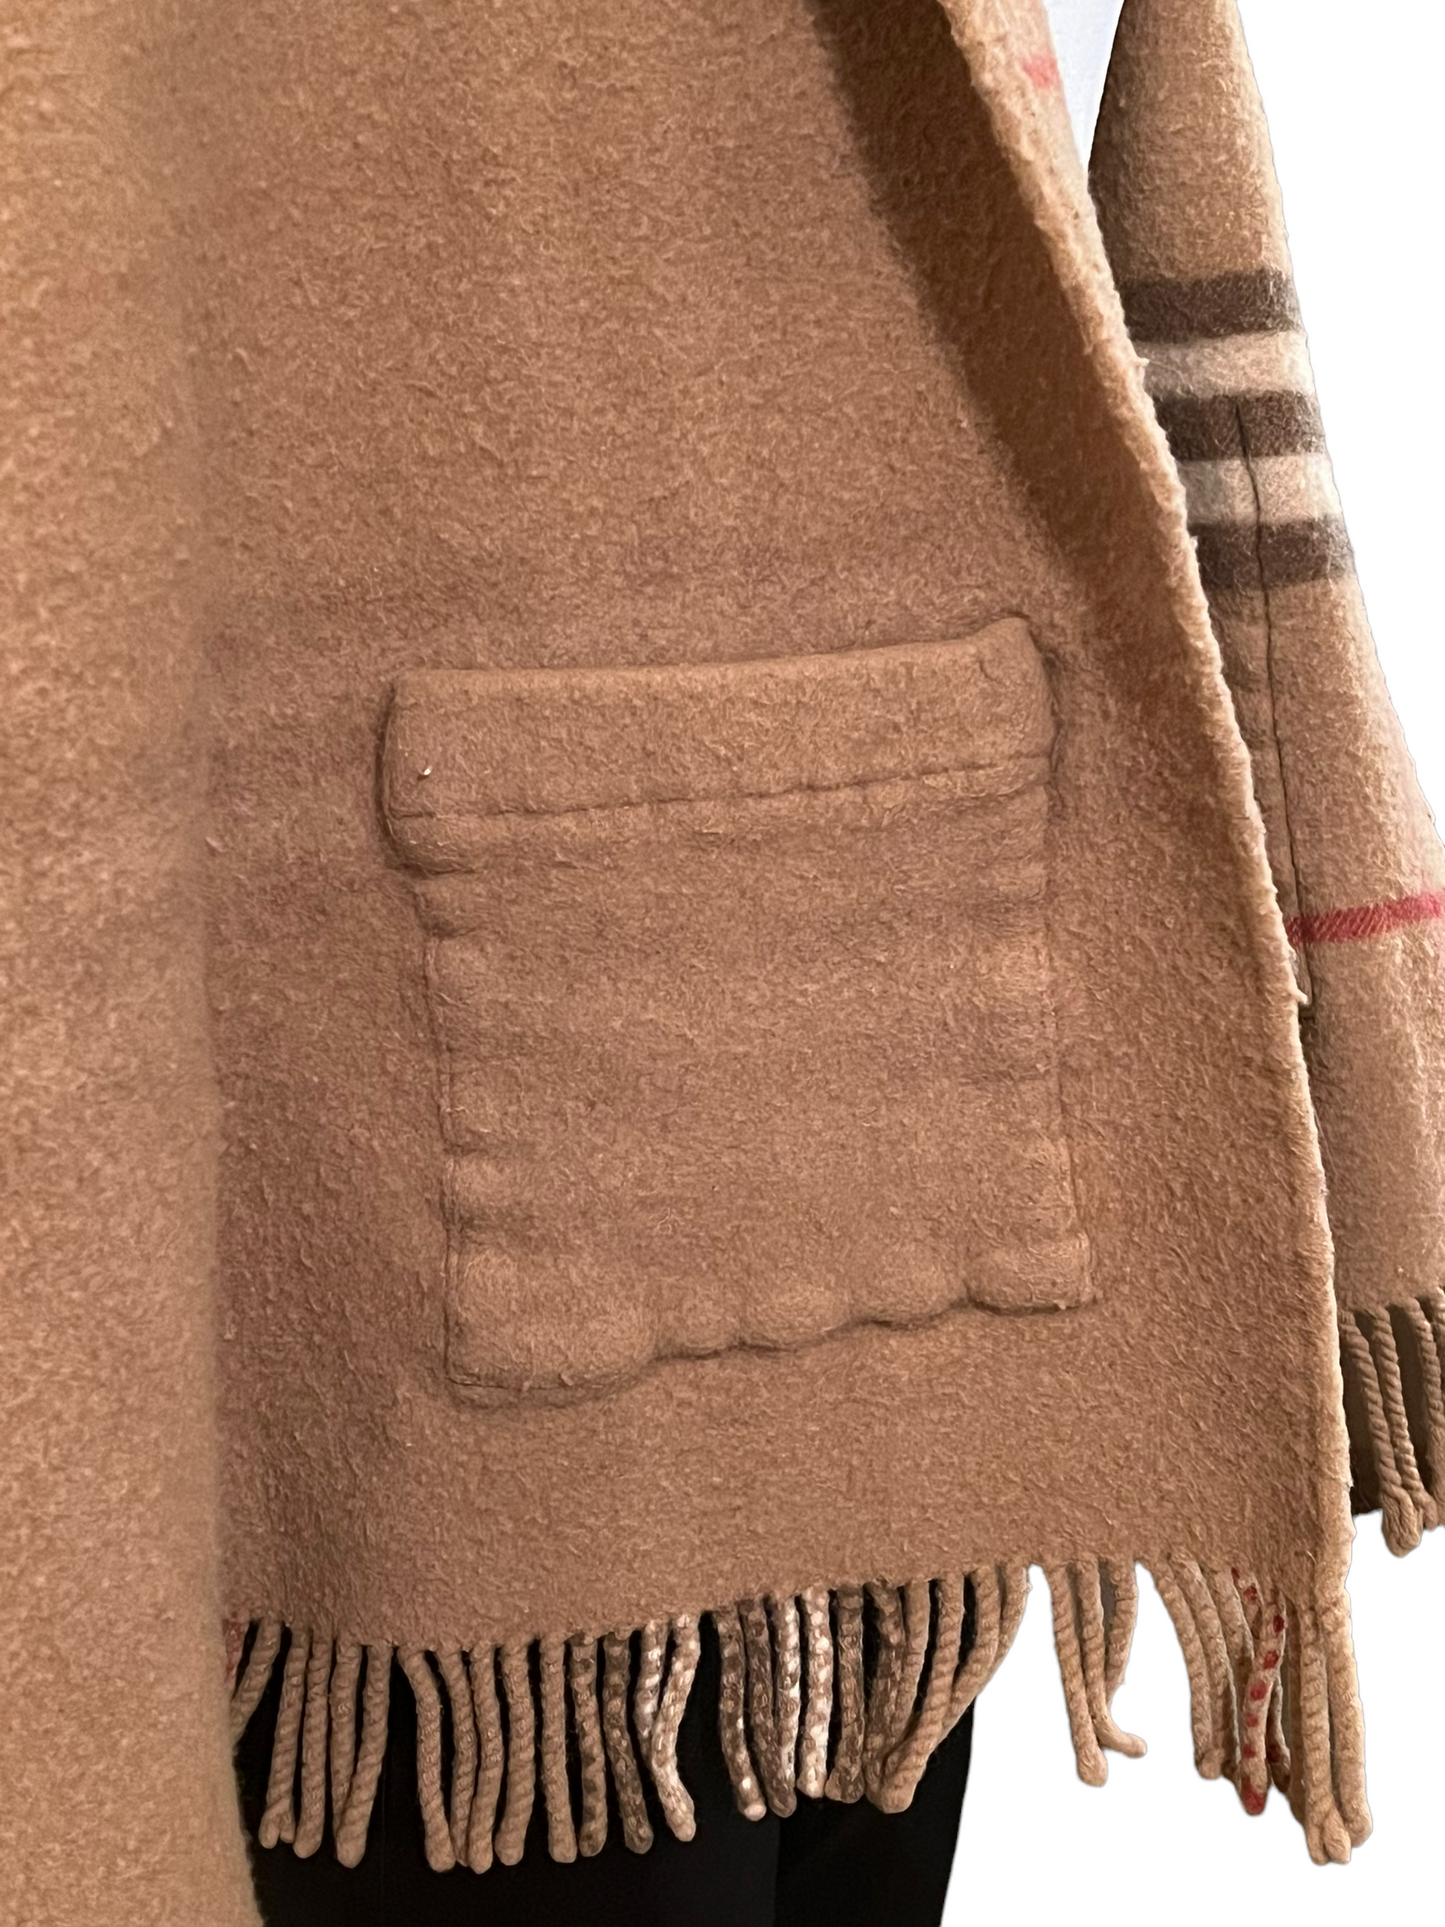 Burberry Tan Double Sided Scarf With Pockets